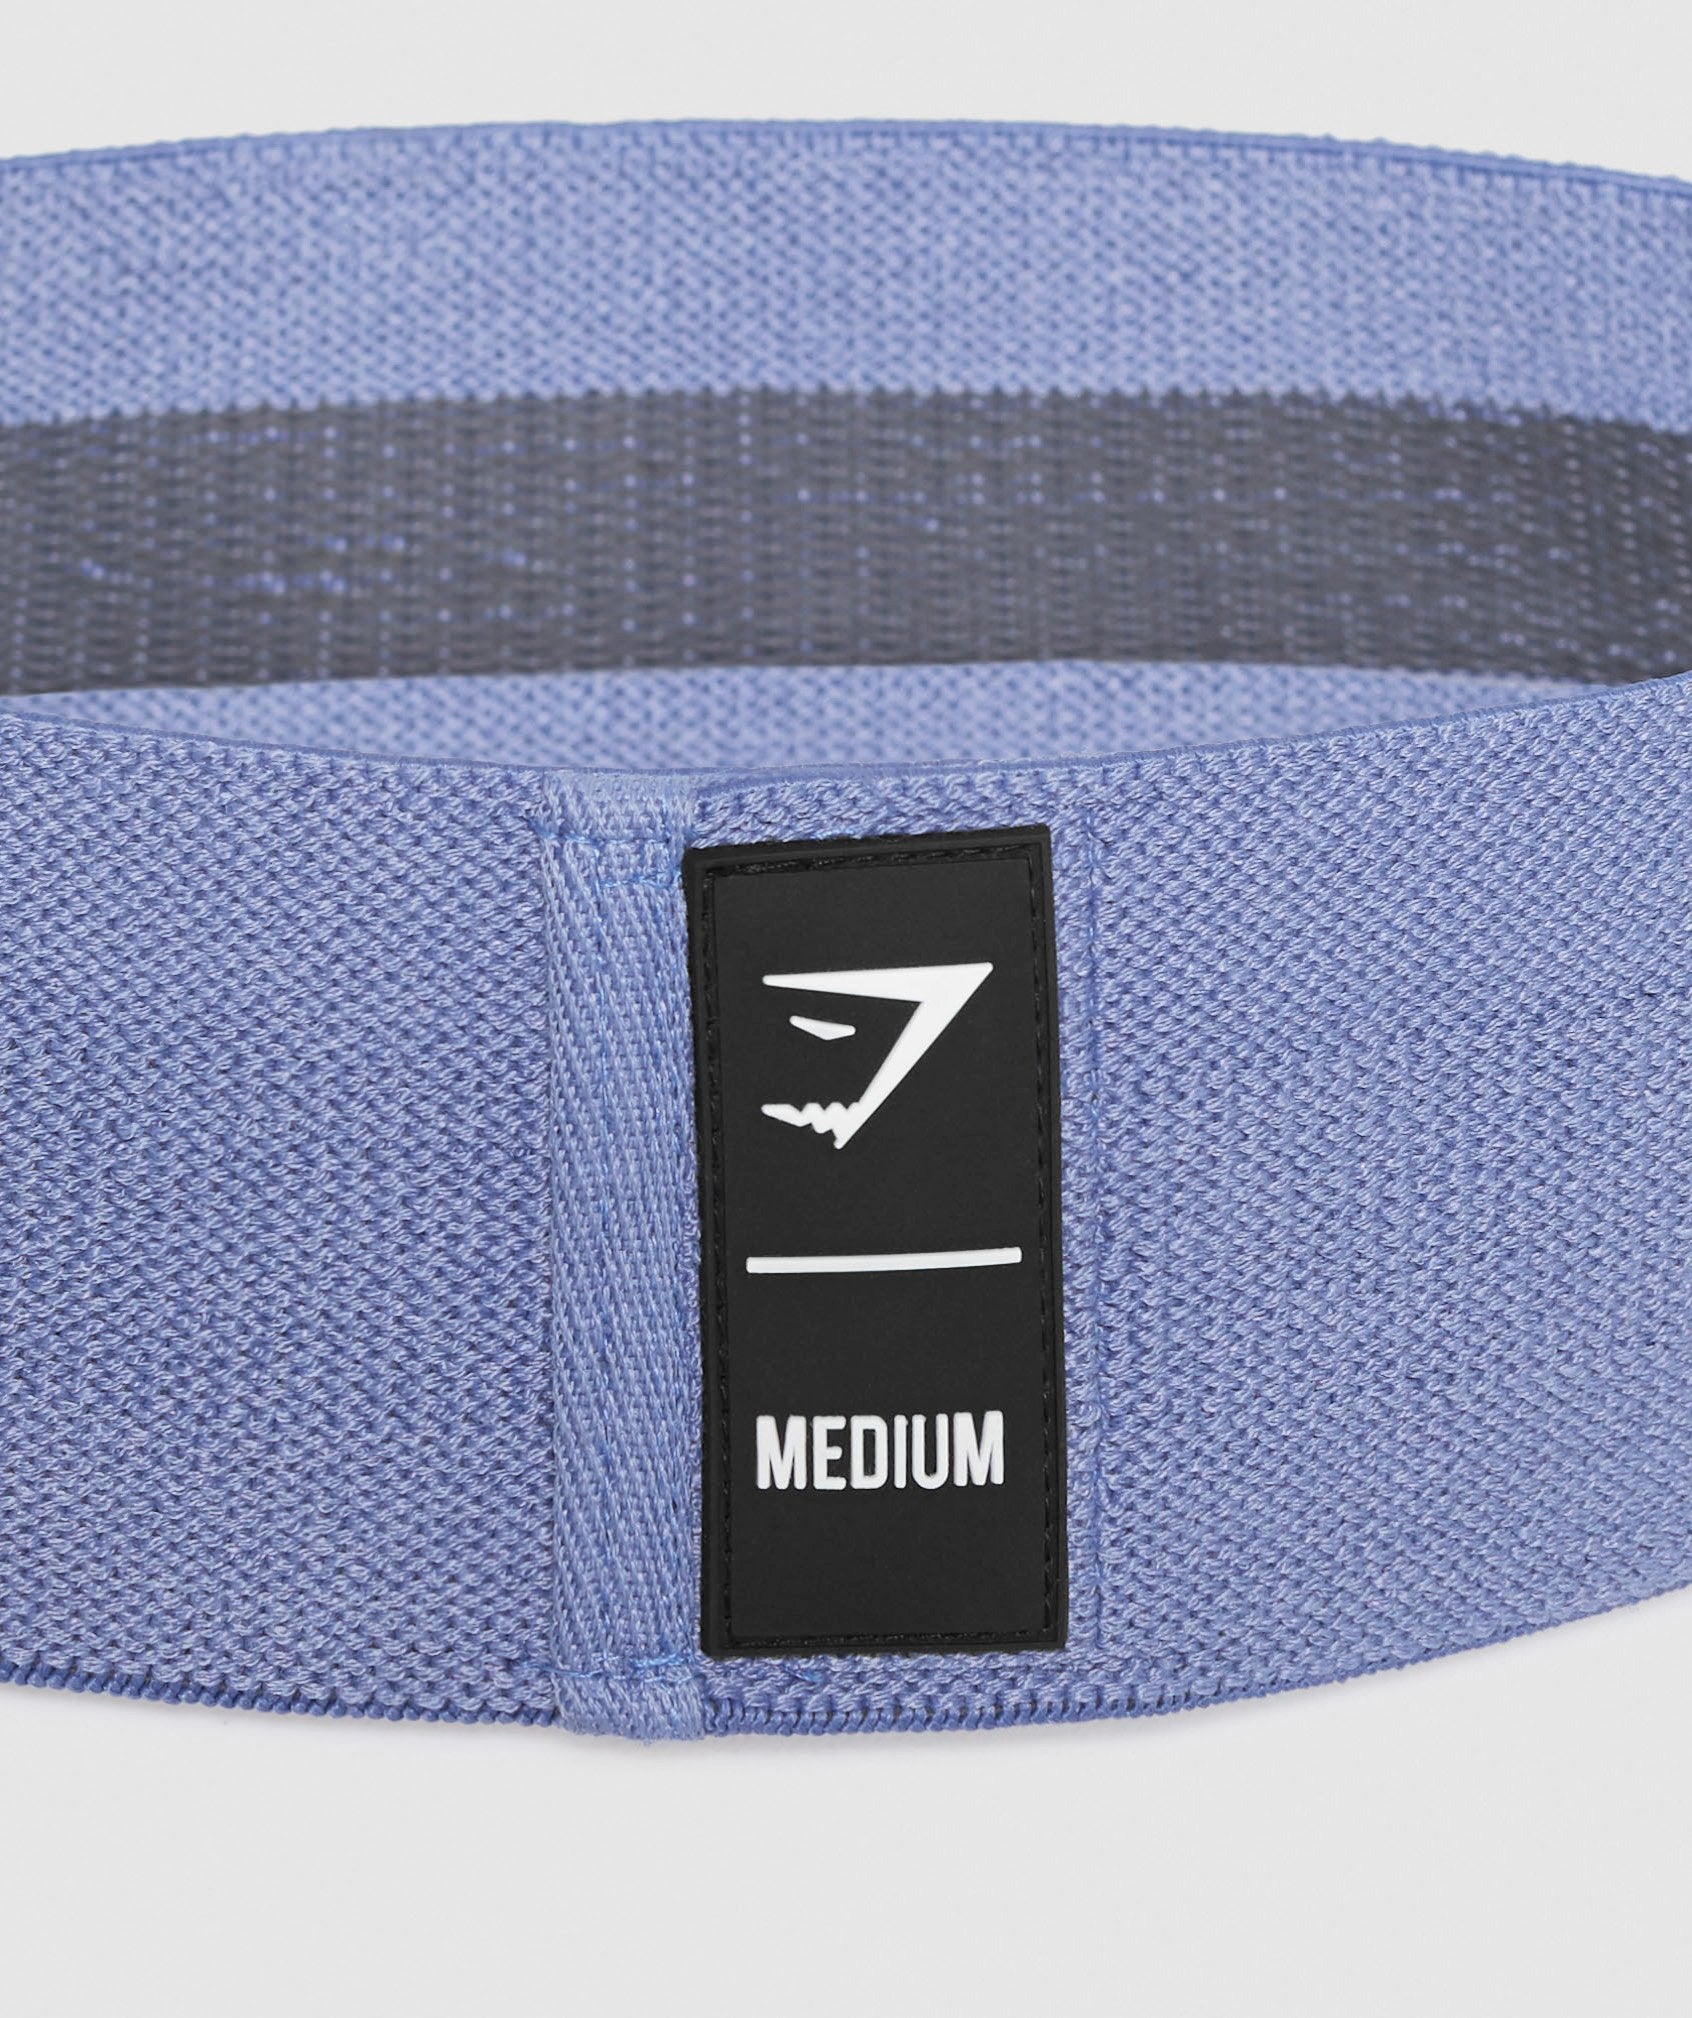 Medium Resistance Band in Blue - view 6